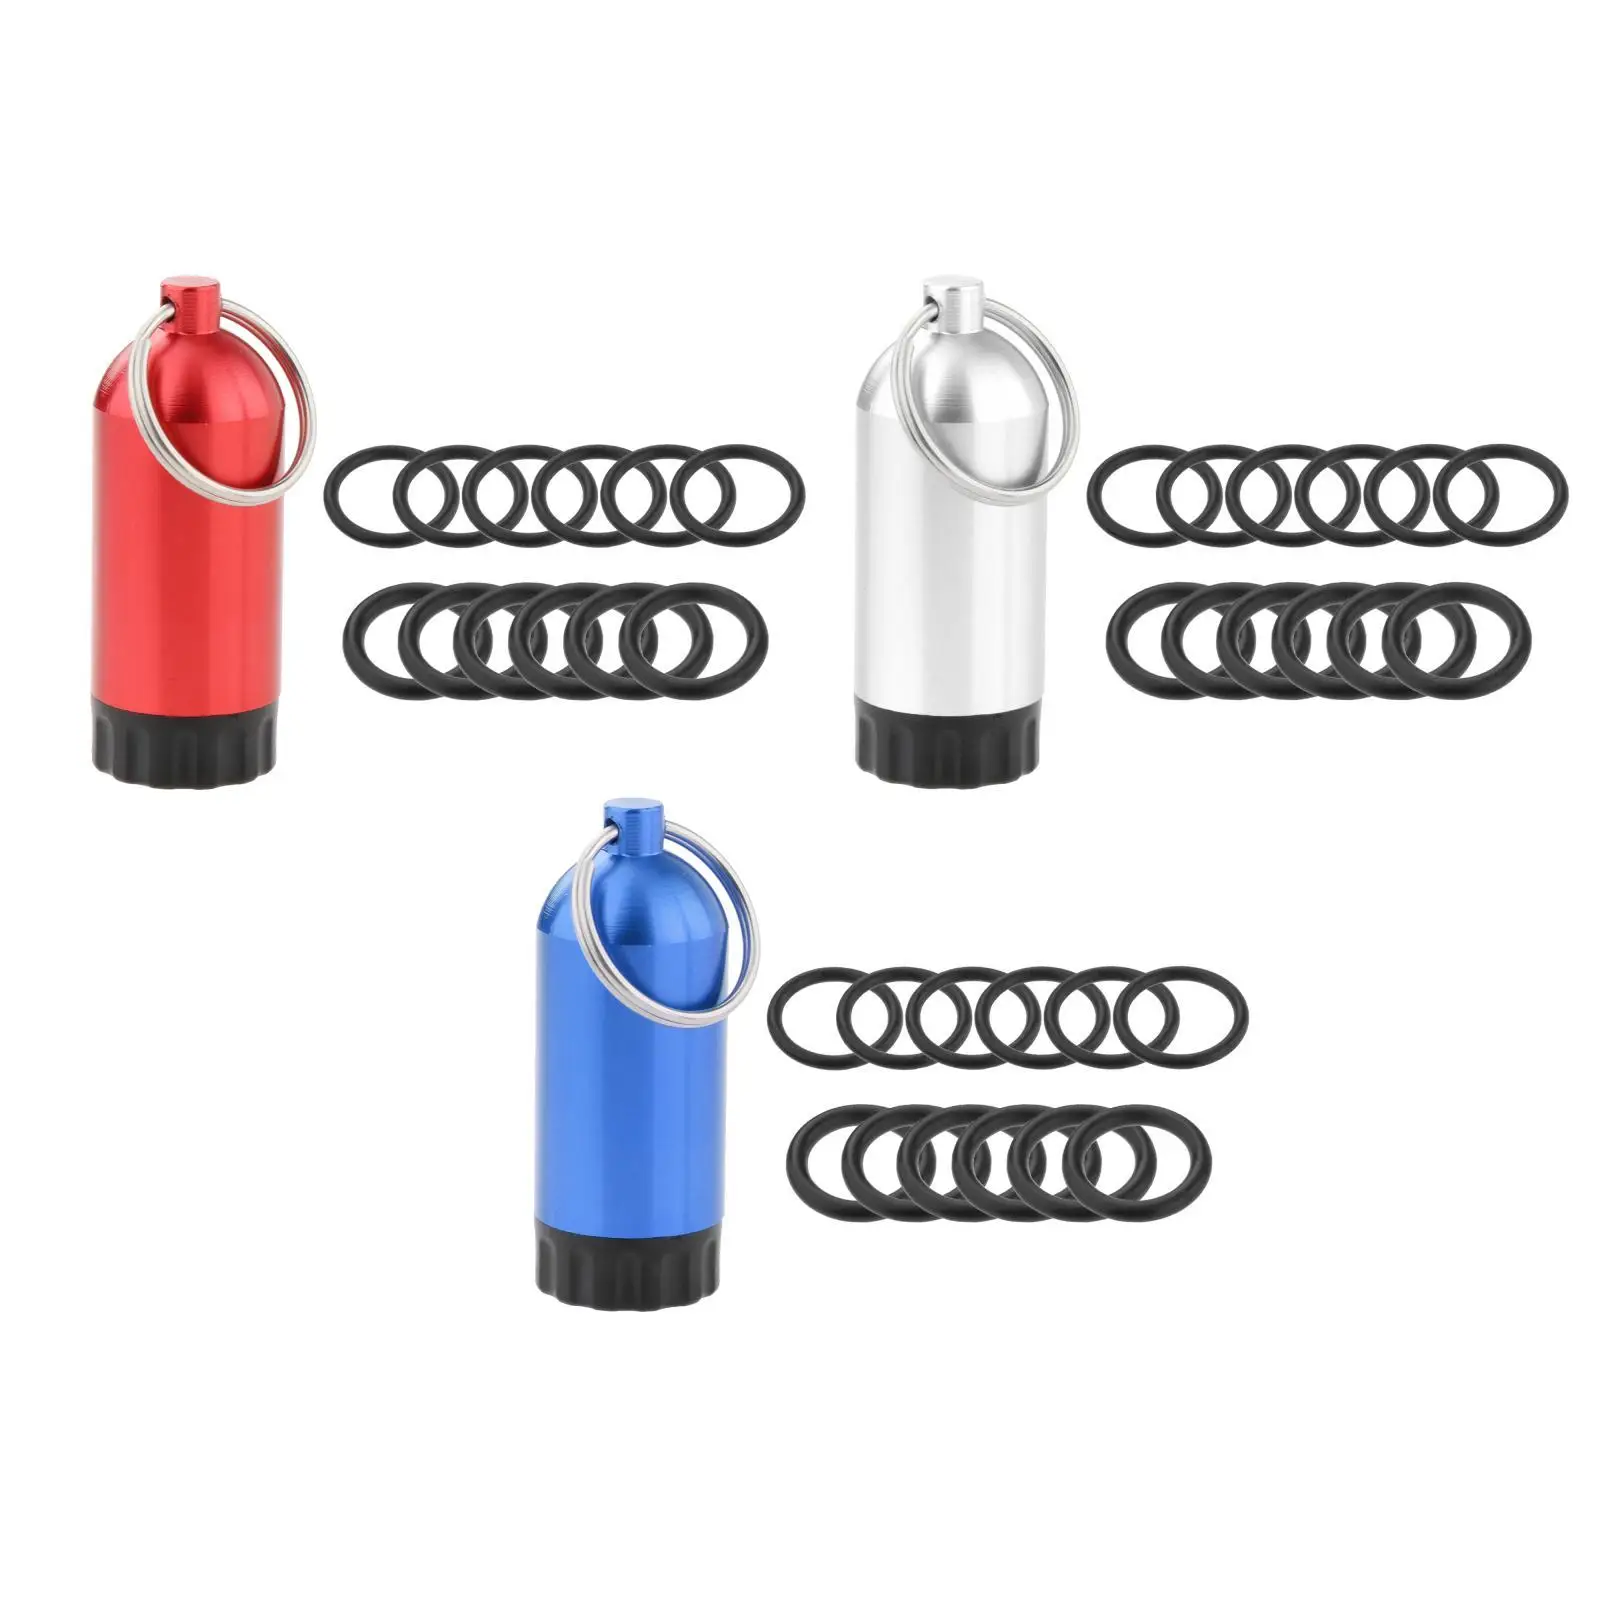 Mini Scuba Diving Tank, Cylinder Storage Bottle with 12 O-Rings Key Chain Dive Aluminum Alloy Repair